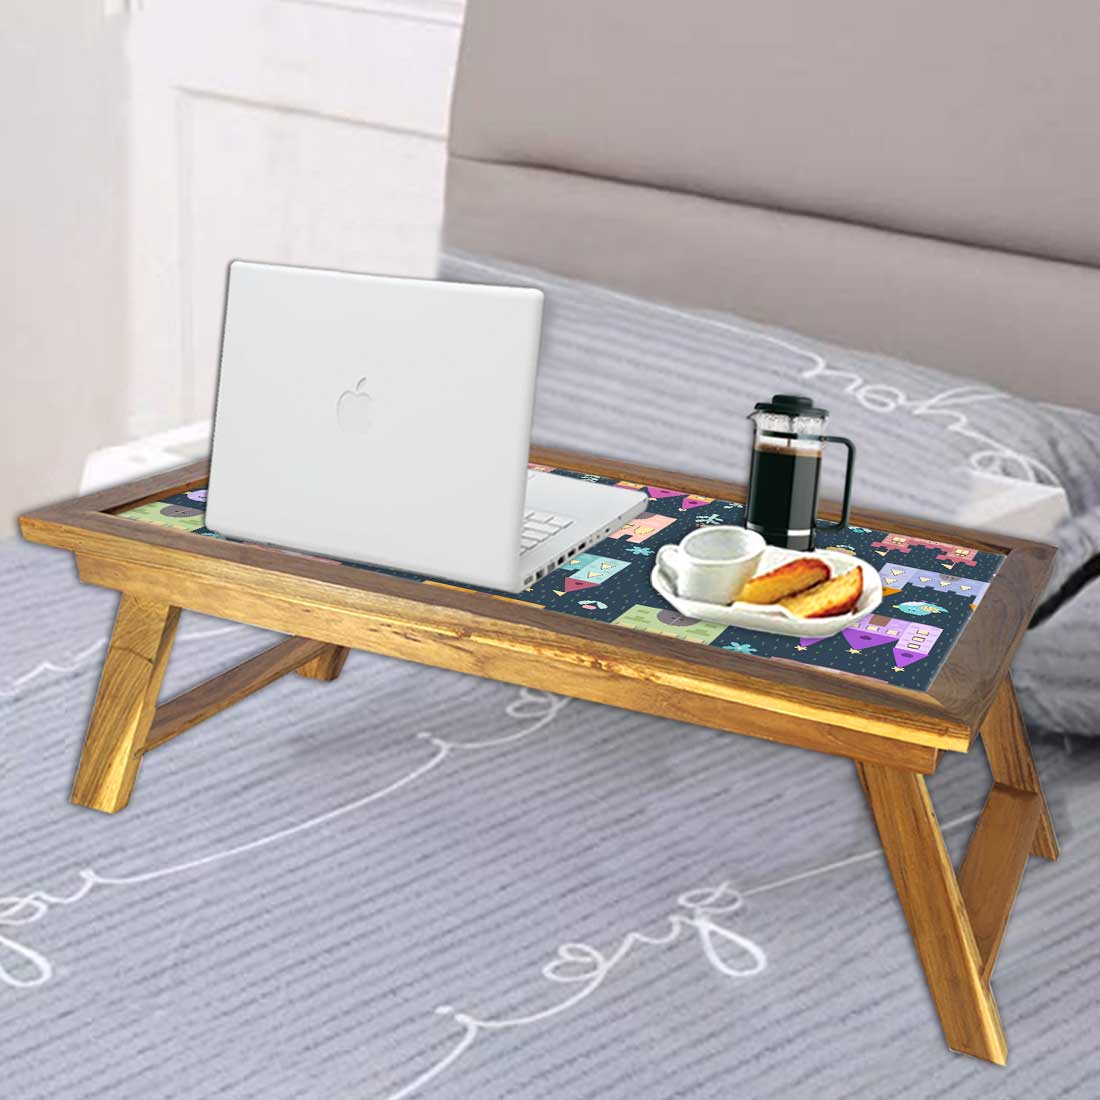 Folding Wooden Food Tray for Bed Breakfast Table Study Desk - Palace Nutcase